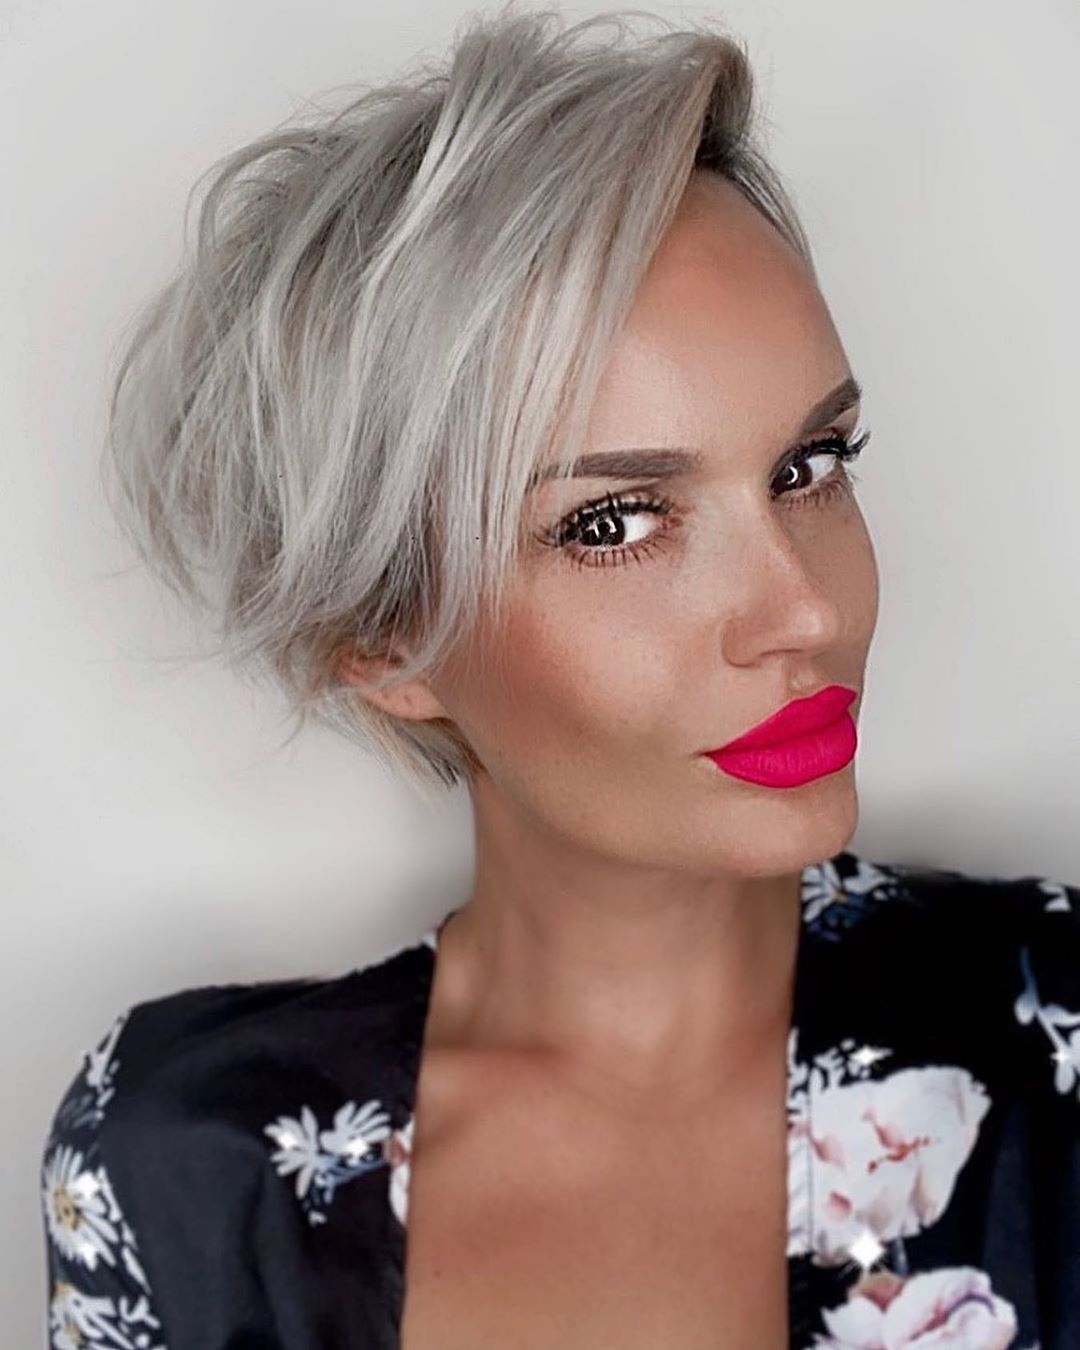 Chic Short Hairstyle with Color - Women Pixie Hairstyles & Haircuts 2021